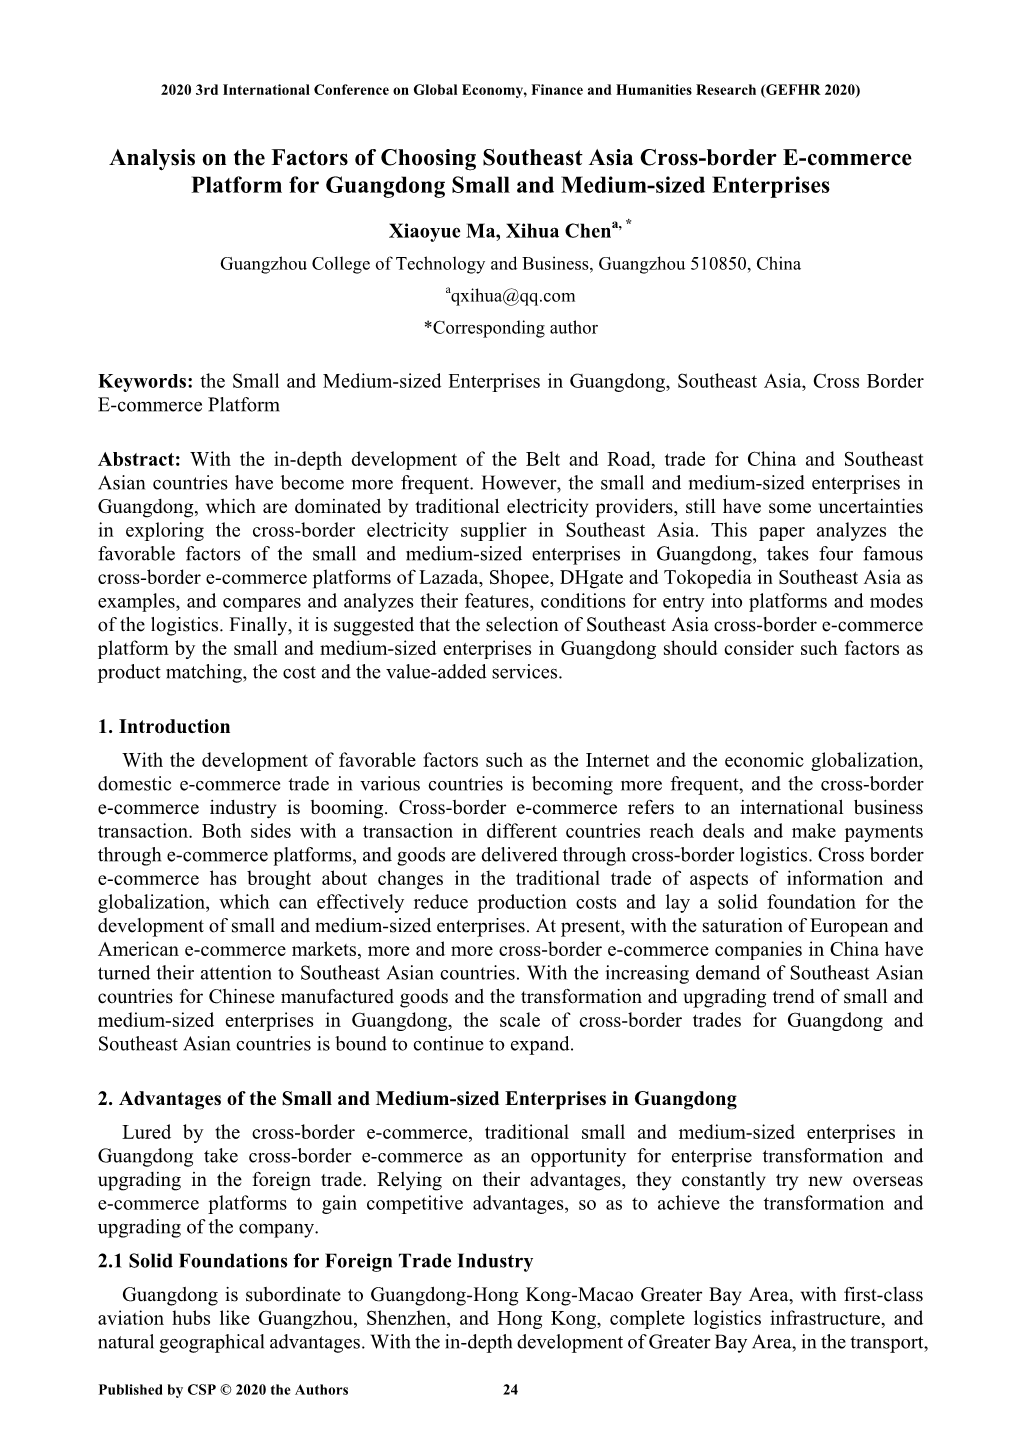 Analysis on the Factors of Choosing Southeast Asia Cross-Border E-Commerce Platform for Guangdong Small and Medium-Sized Enterprises